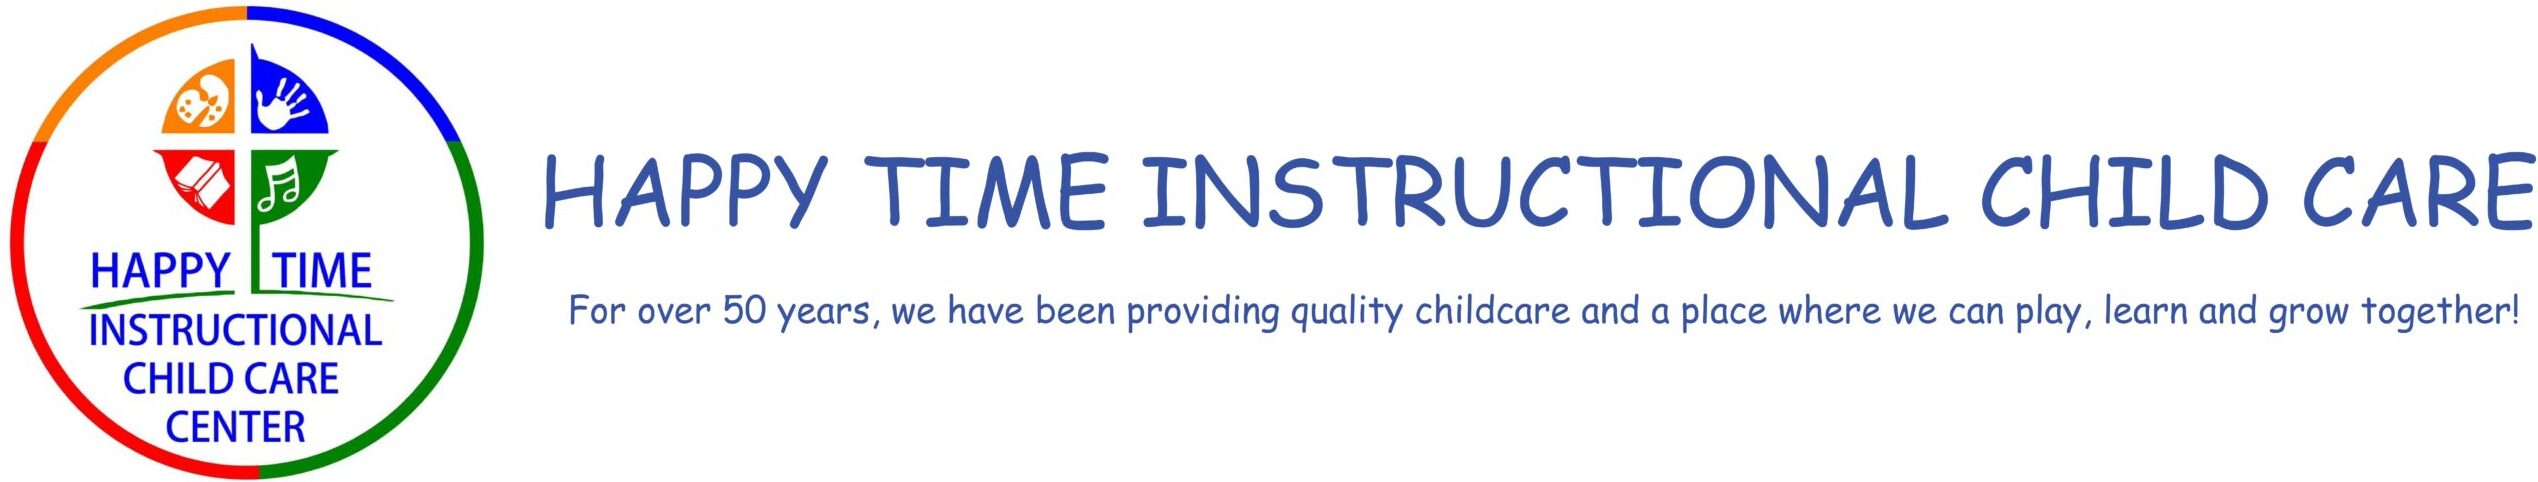 Happy Time Instructional Child Care